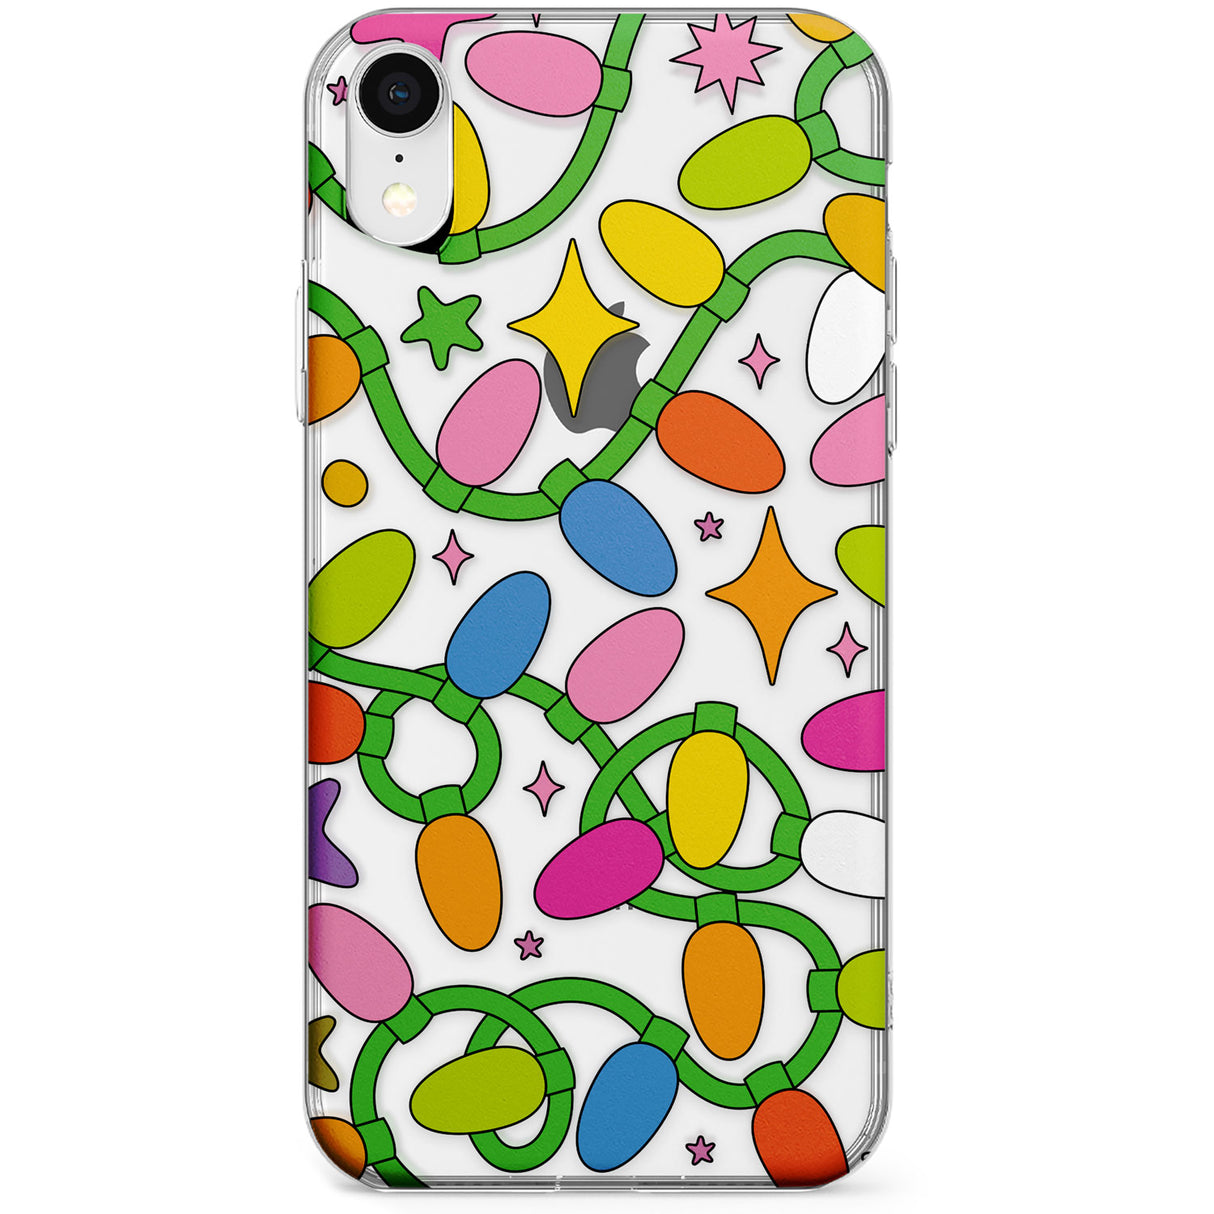 Festive Lights Pattern Phone Case for iPhone X, XS Max, XR